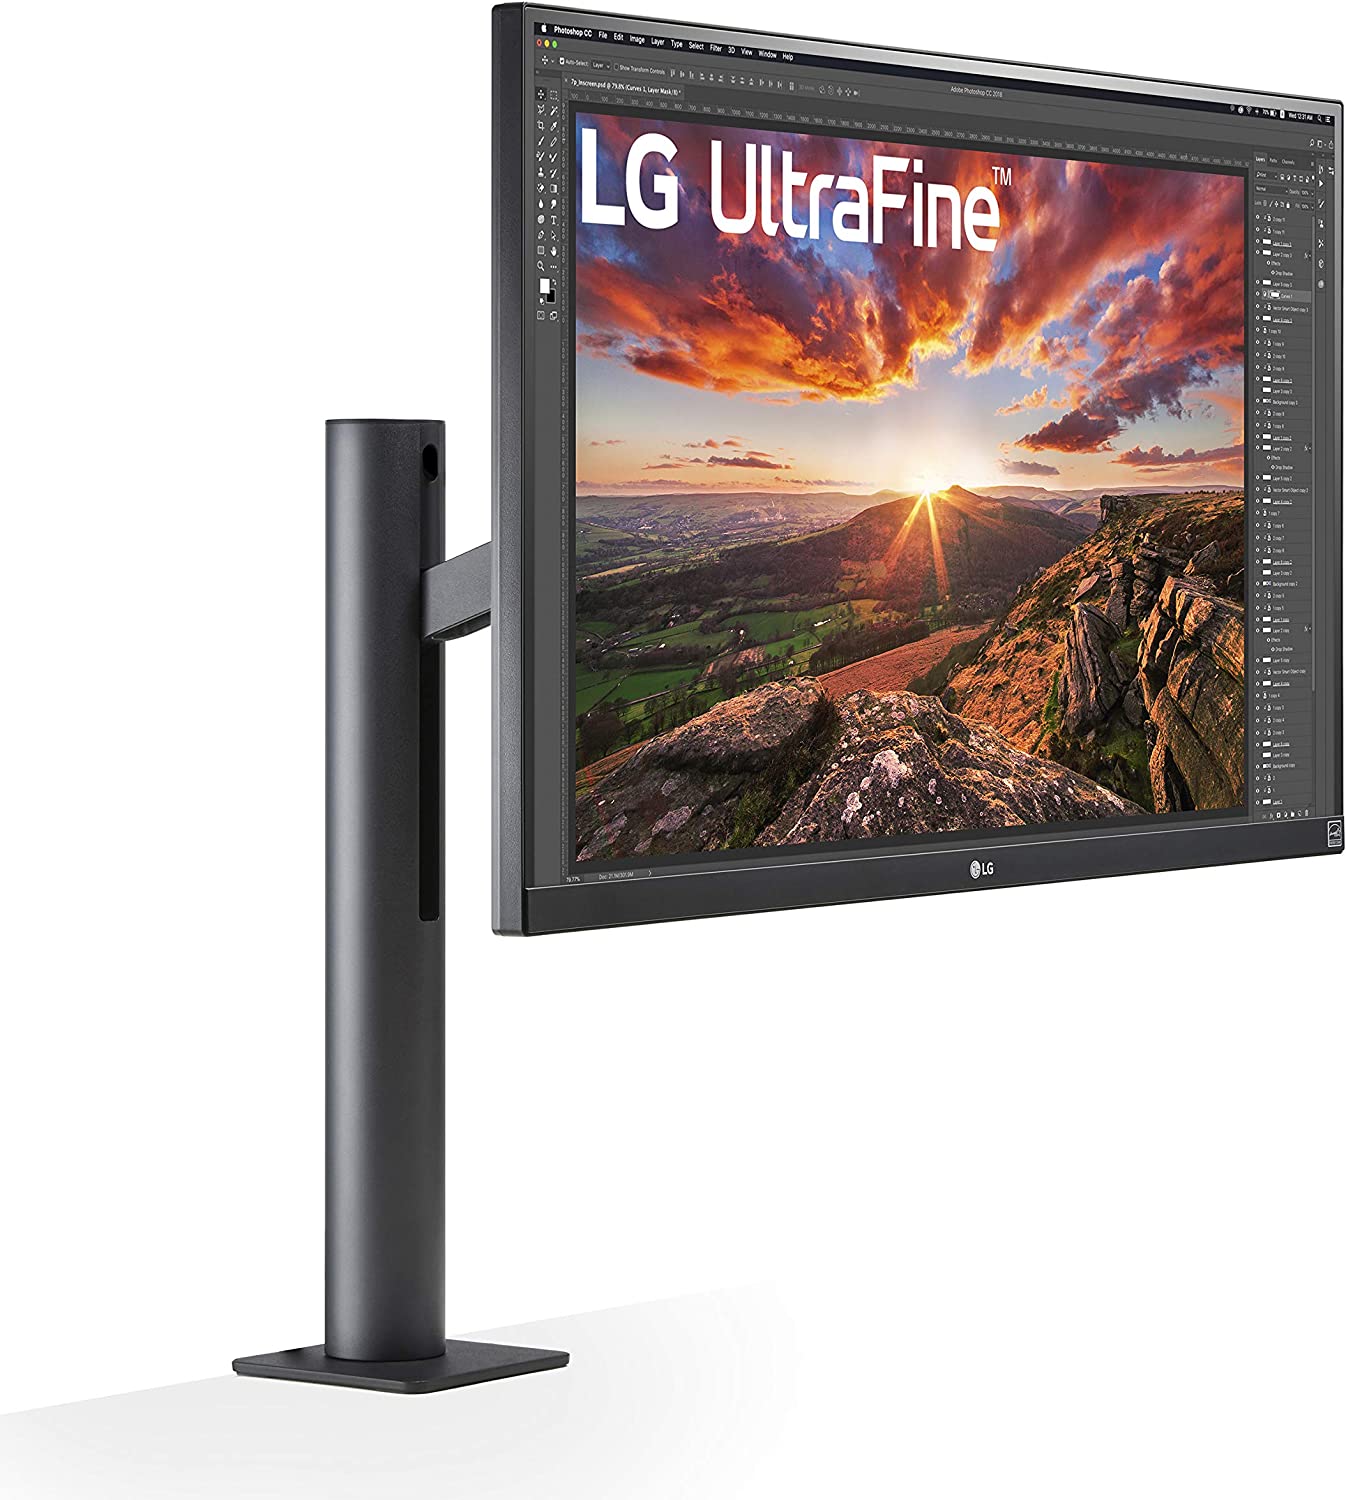 LG 27UN880-B Ultrafine Monitor - Now Only $389.99!